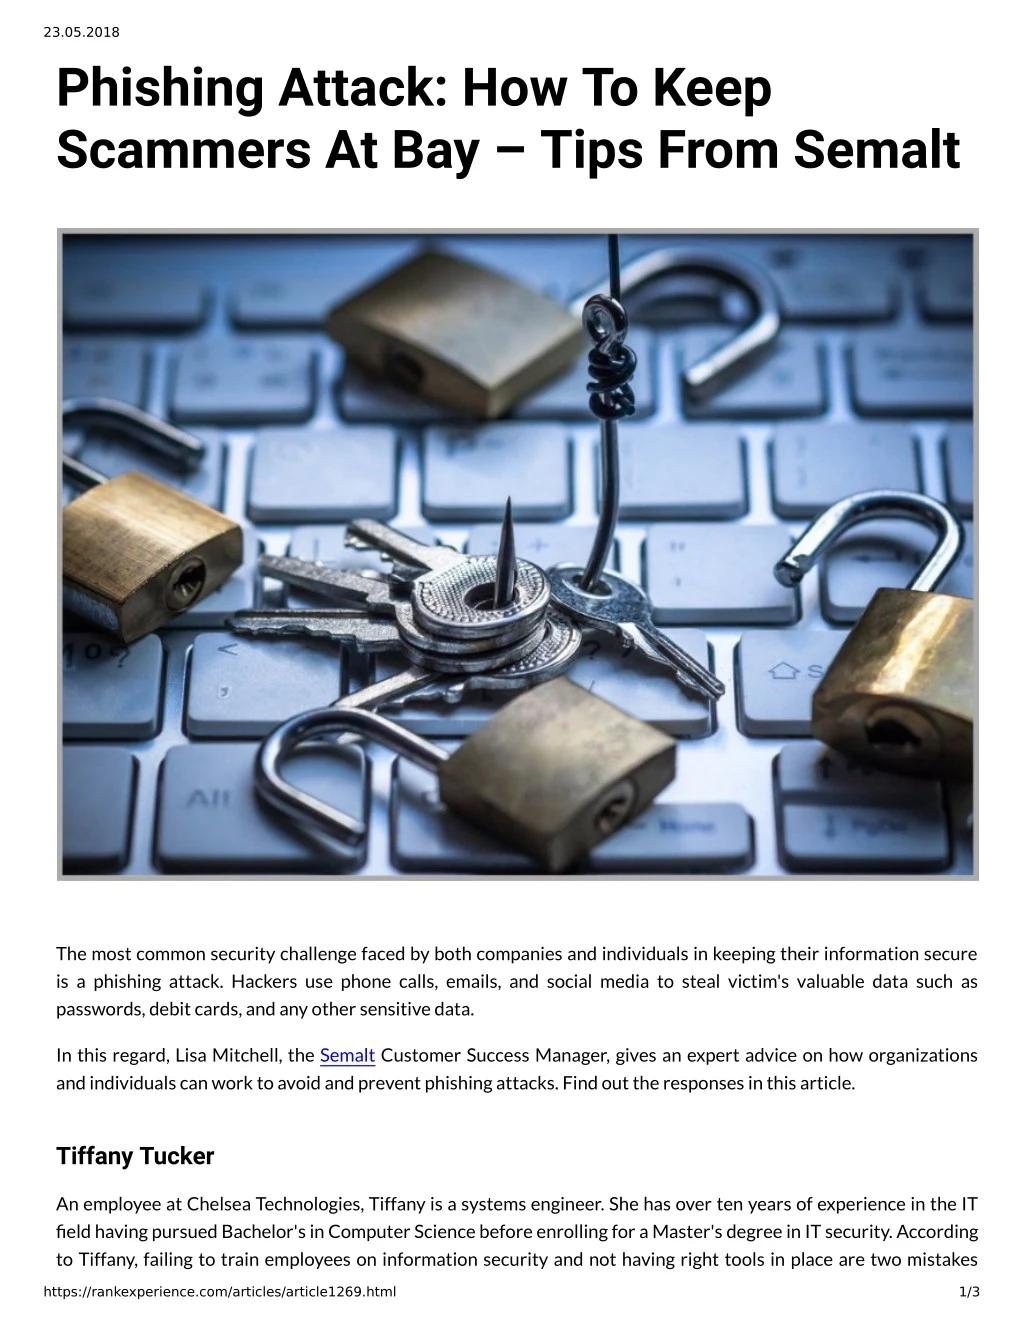 23 05 2018 phishing attack how to keep scammers